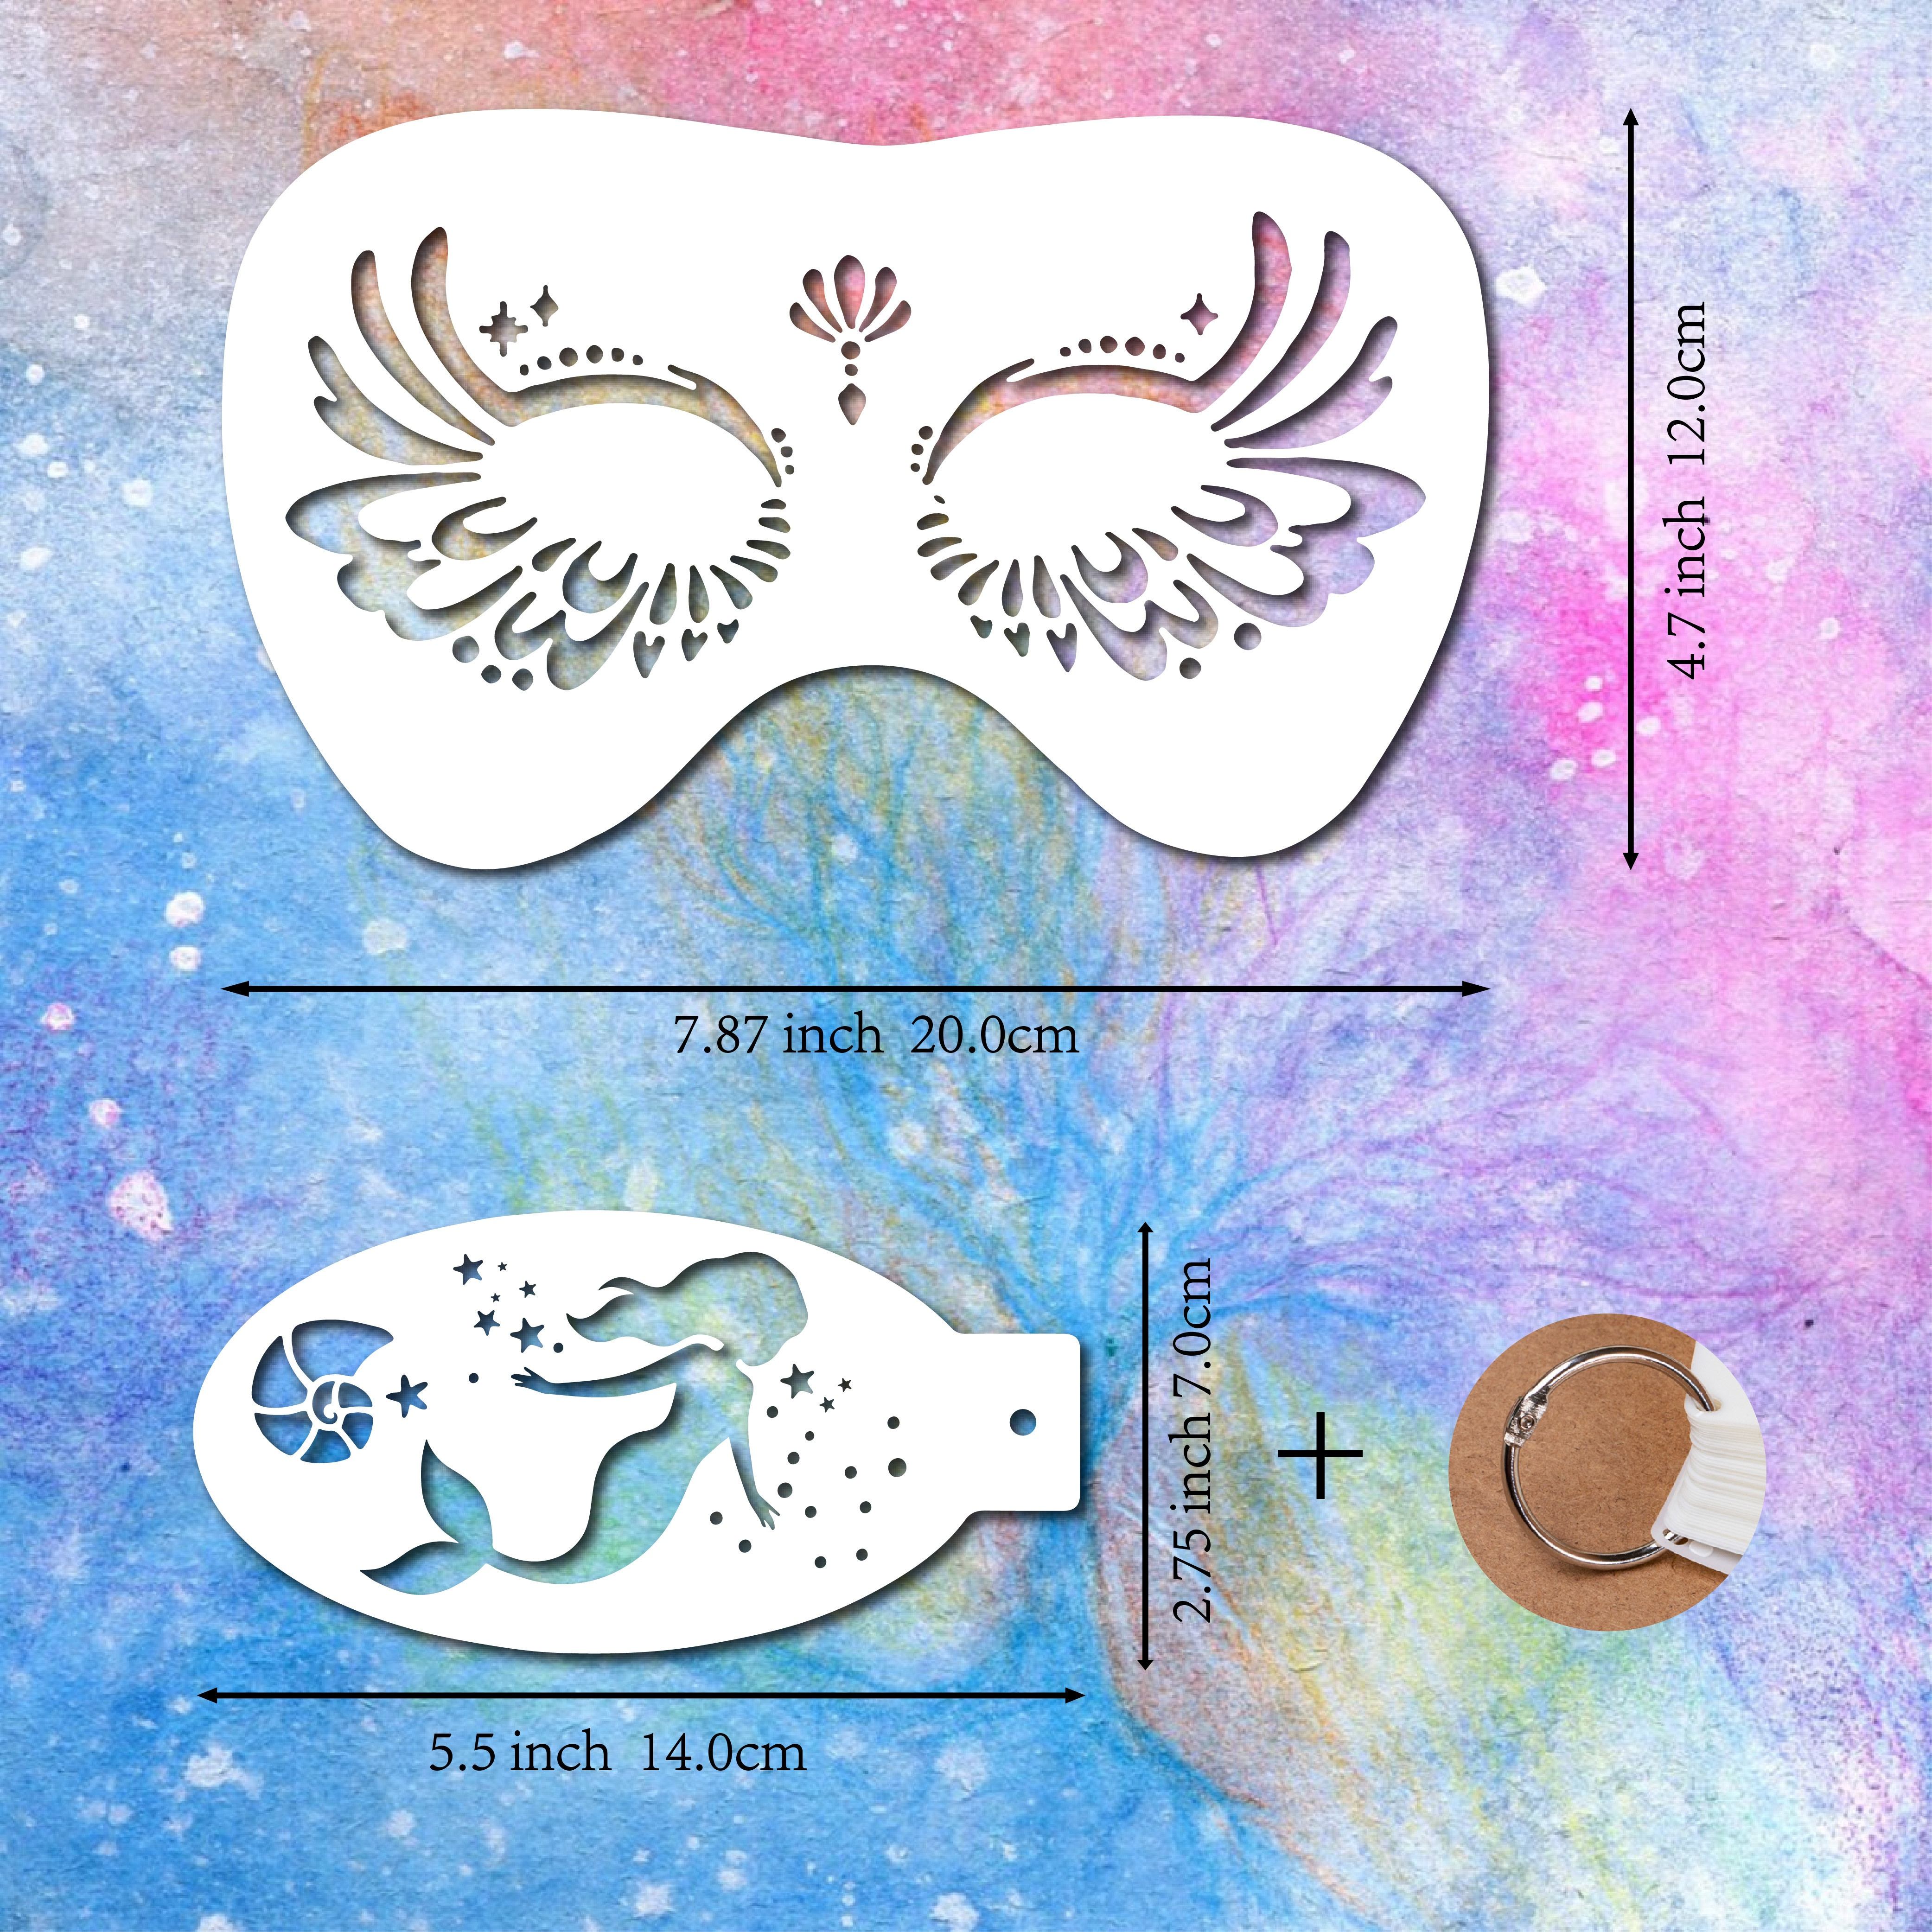 Reusable Face Paint Stencils, 7styles/set Body Painting Template Flower  Star Facial Design Perfect for Parties, Christmas, Halloween,  Carnivals,Church Events 